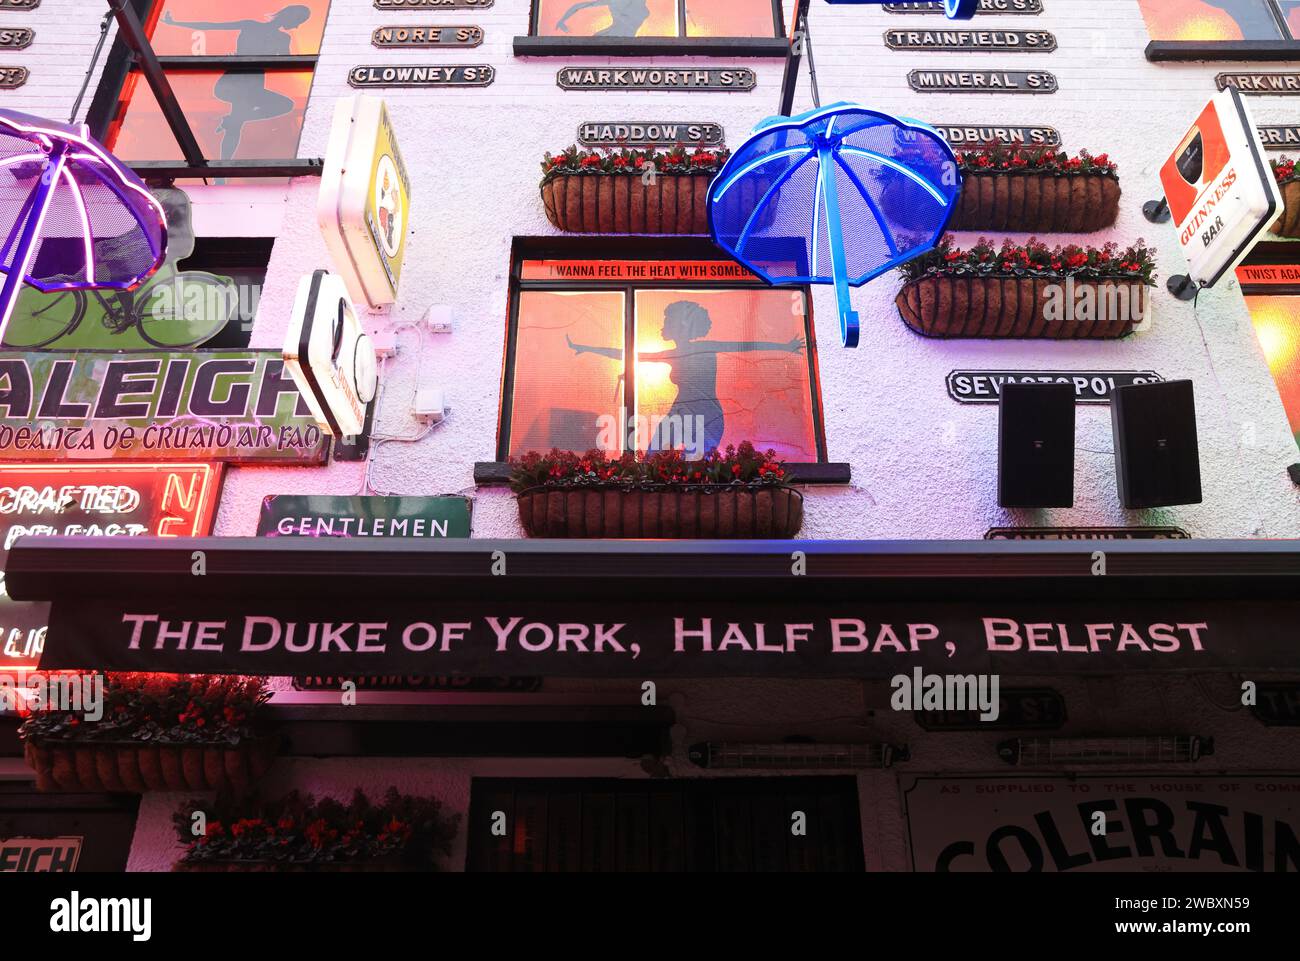 The Duke of York, a traditional, popular Belfast pub, with craic, music & humour, on a narrow, cobbled alleyway in the historic Half Bap area, in NI. Stock Photo